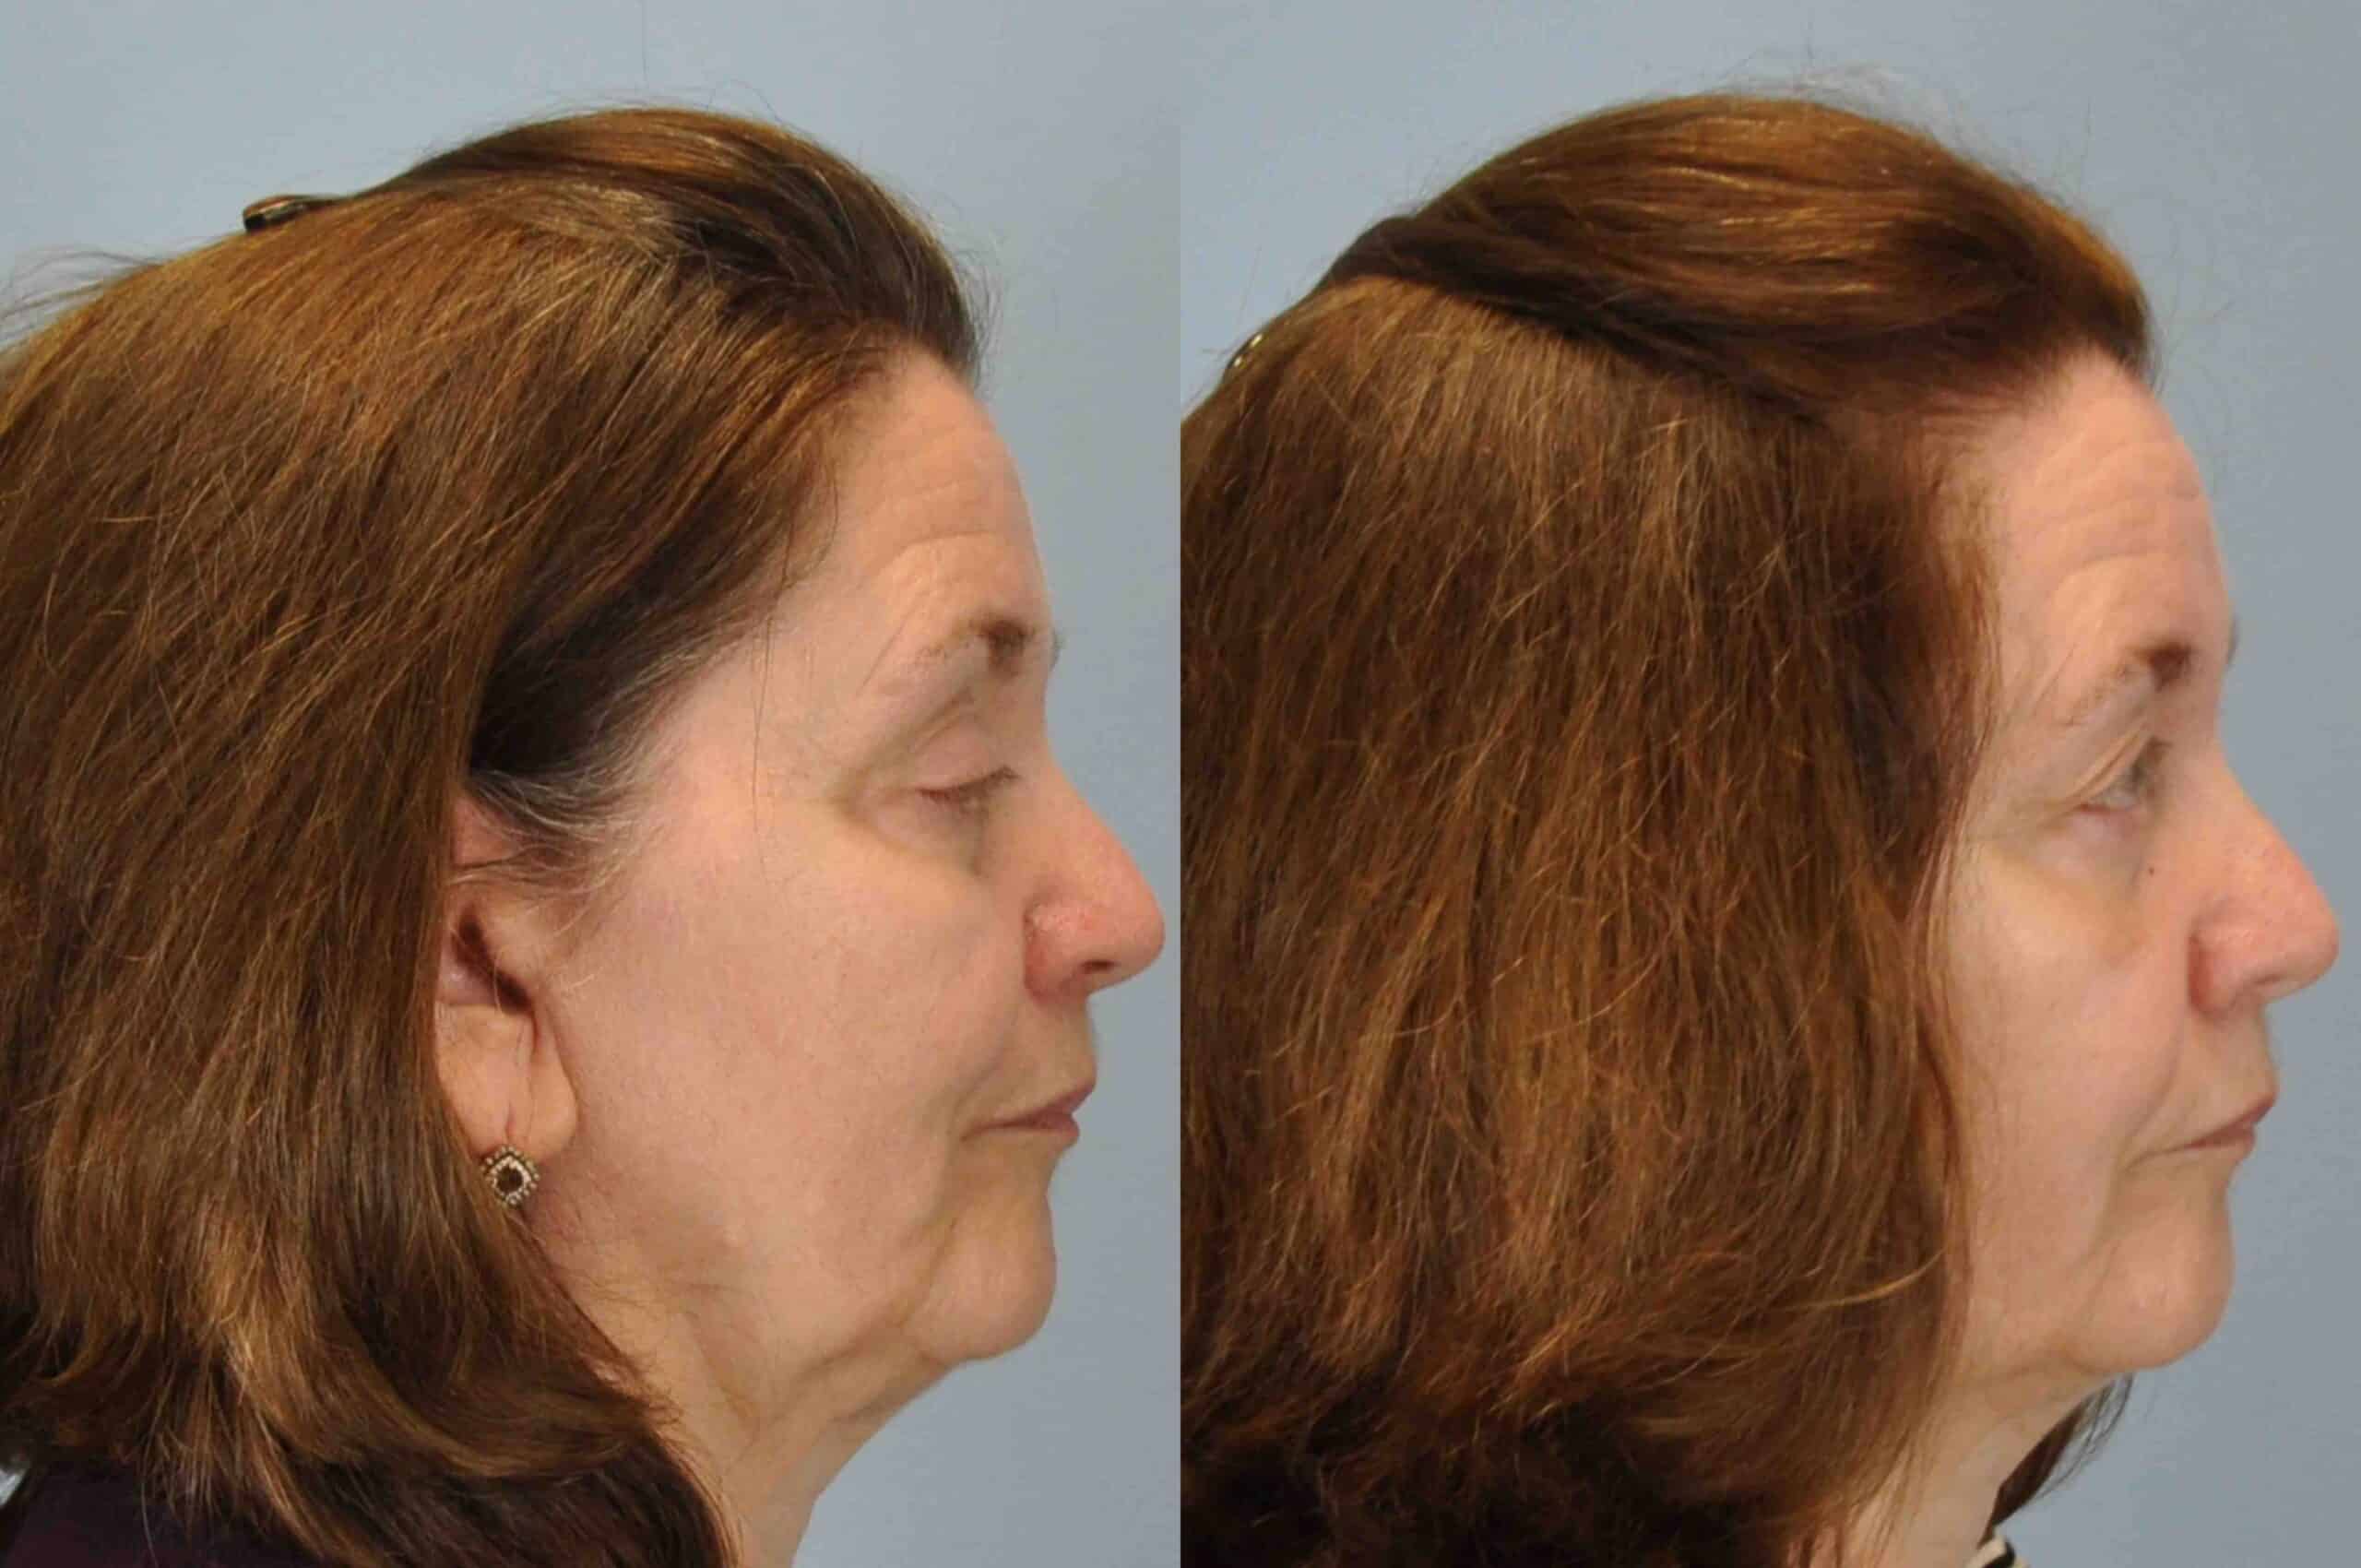 Before and after 3 weeks post op from Lower blepharoplasty, Levator Ptosis performed by Dr. Paul Vanek (side view)